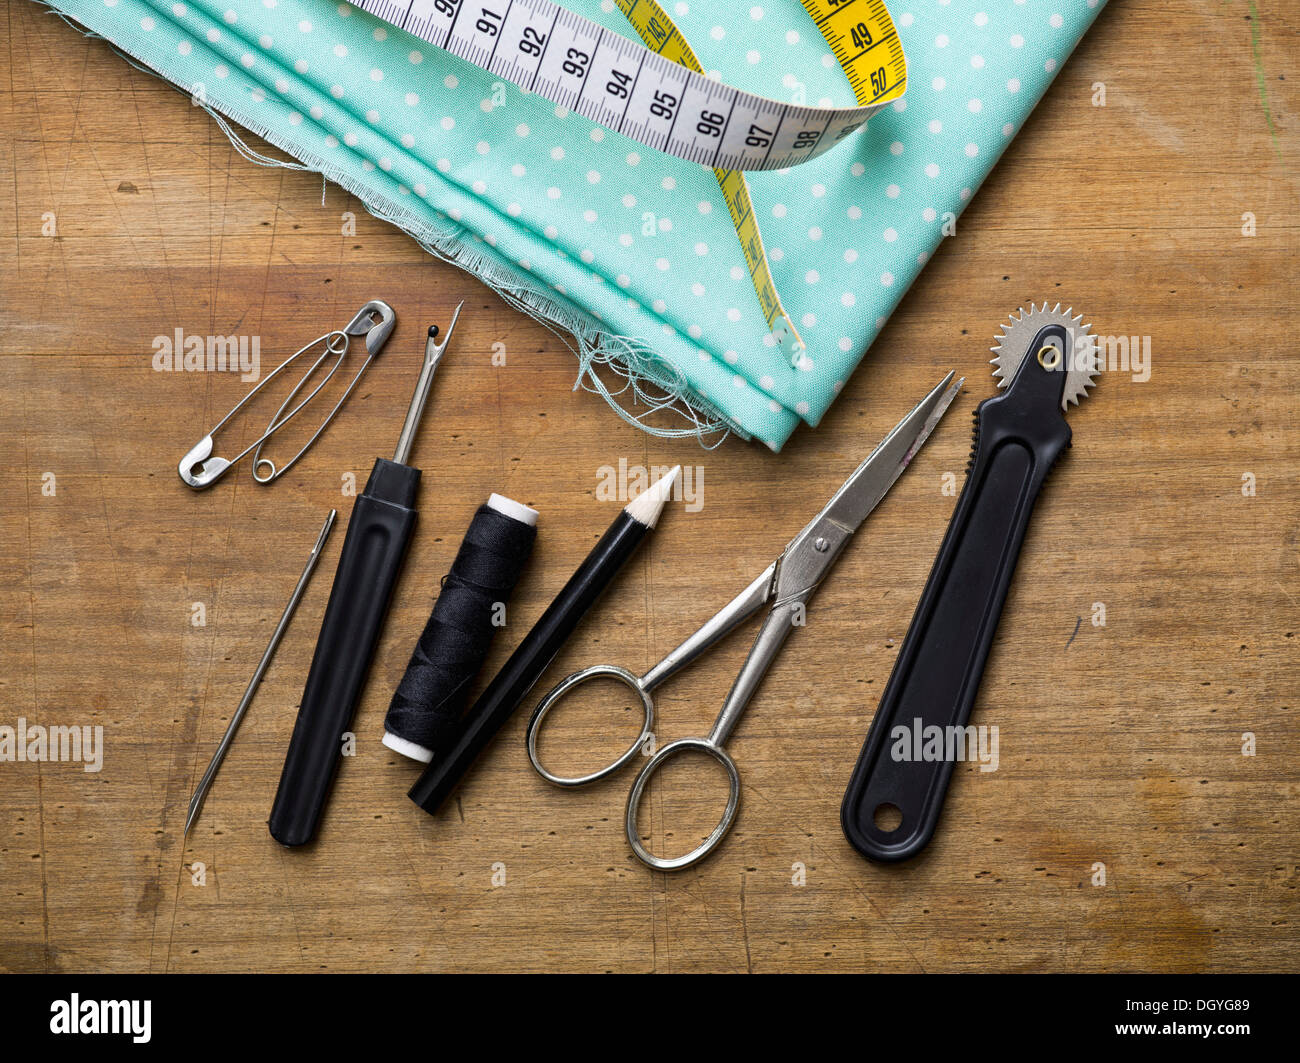 Various sewing equipment arranged on a wooden surface Stock Photo